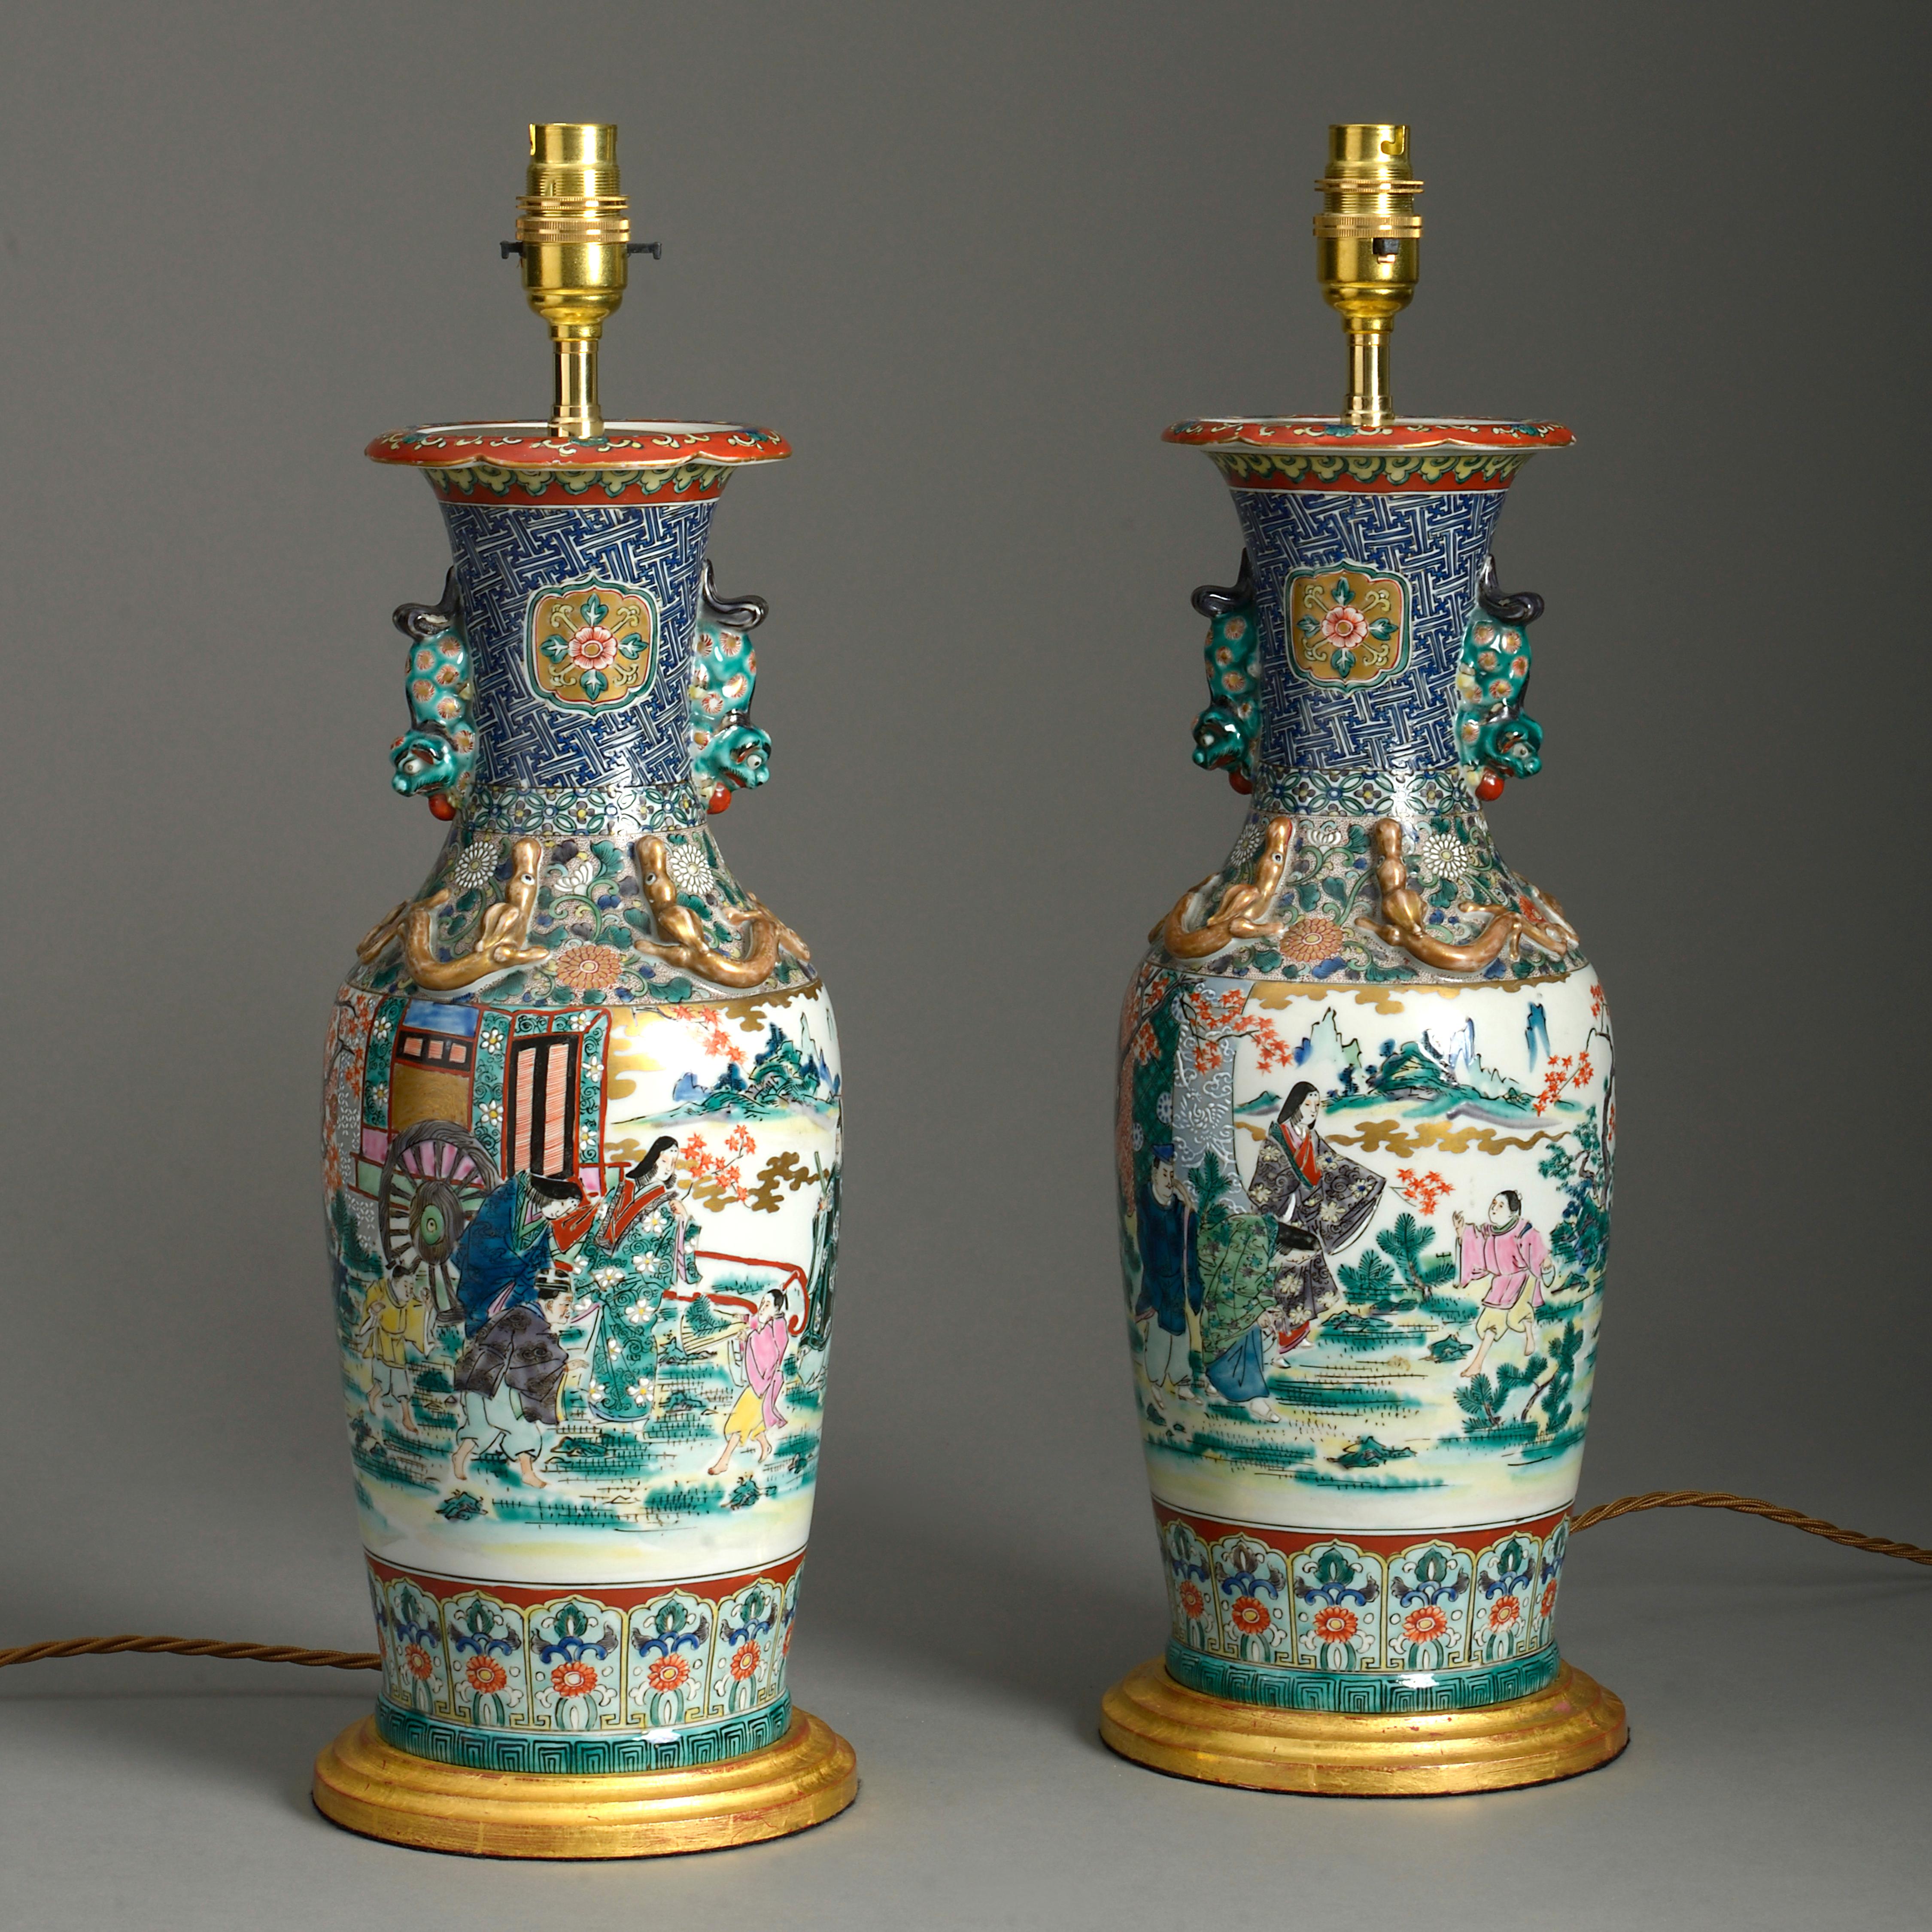 A pair of late 19th century Meiji Period polychrome glazed porcelain Kutani vases, decorated with figurative scenes, the bodies having applied handles and gilded dragons.

Now wired as table lamps and mounted upon turned giltwood